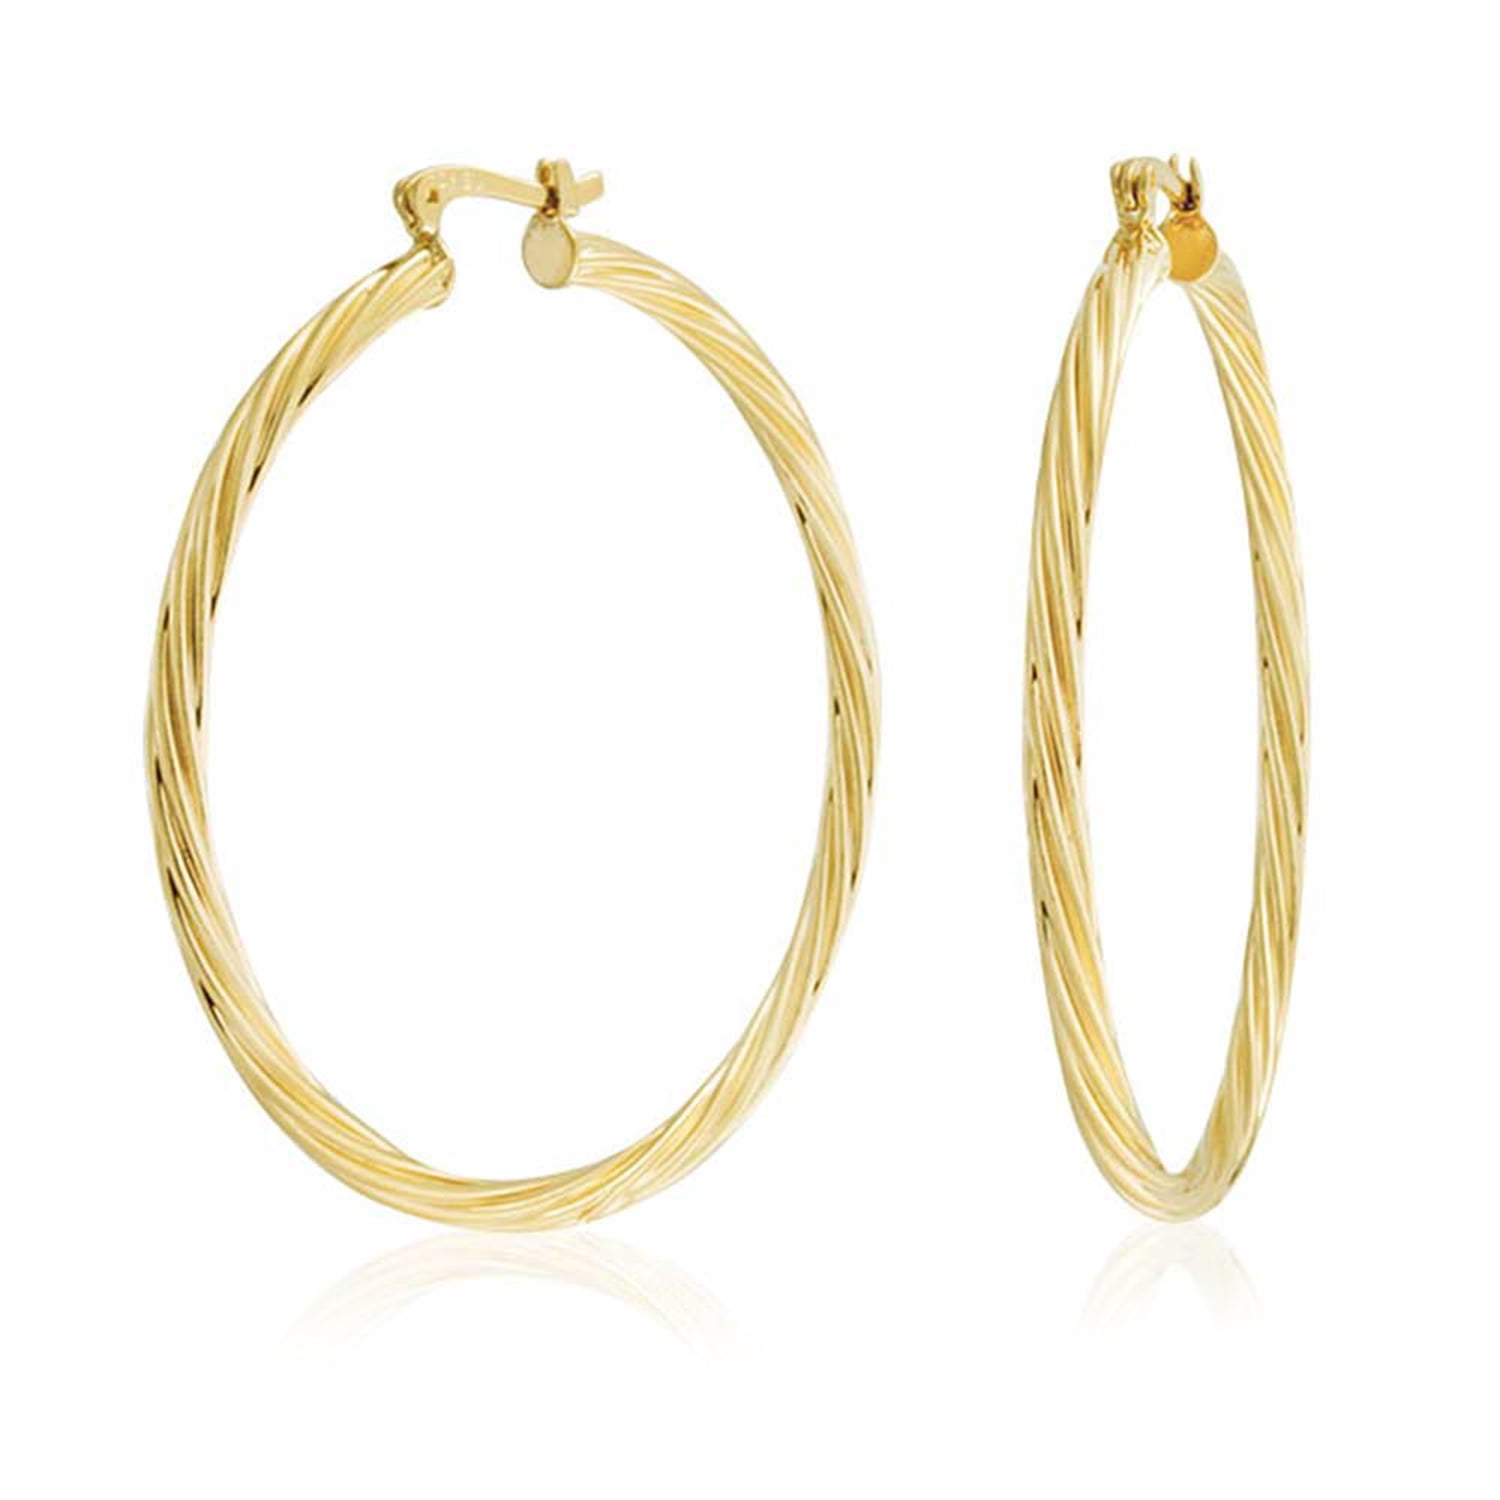 Jewelry - Creole Twisted Rope Cable Big Large Hoop Earrings For Women ...